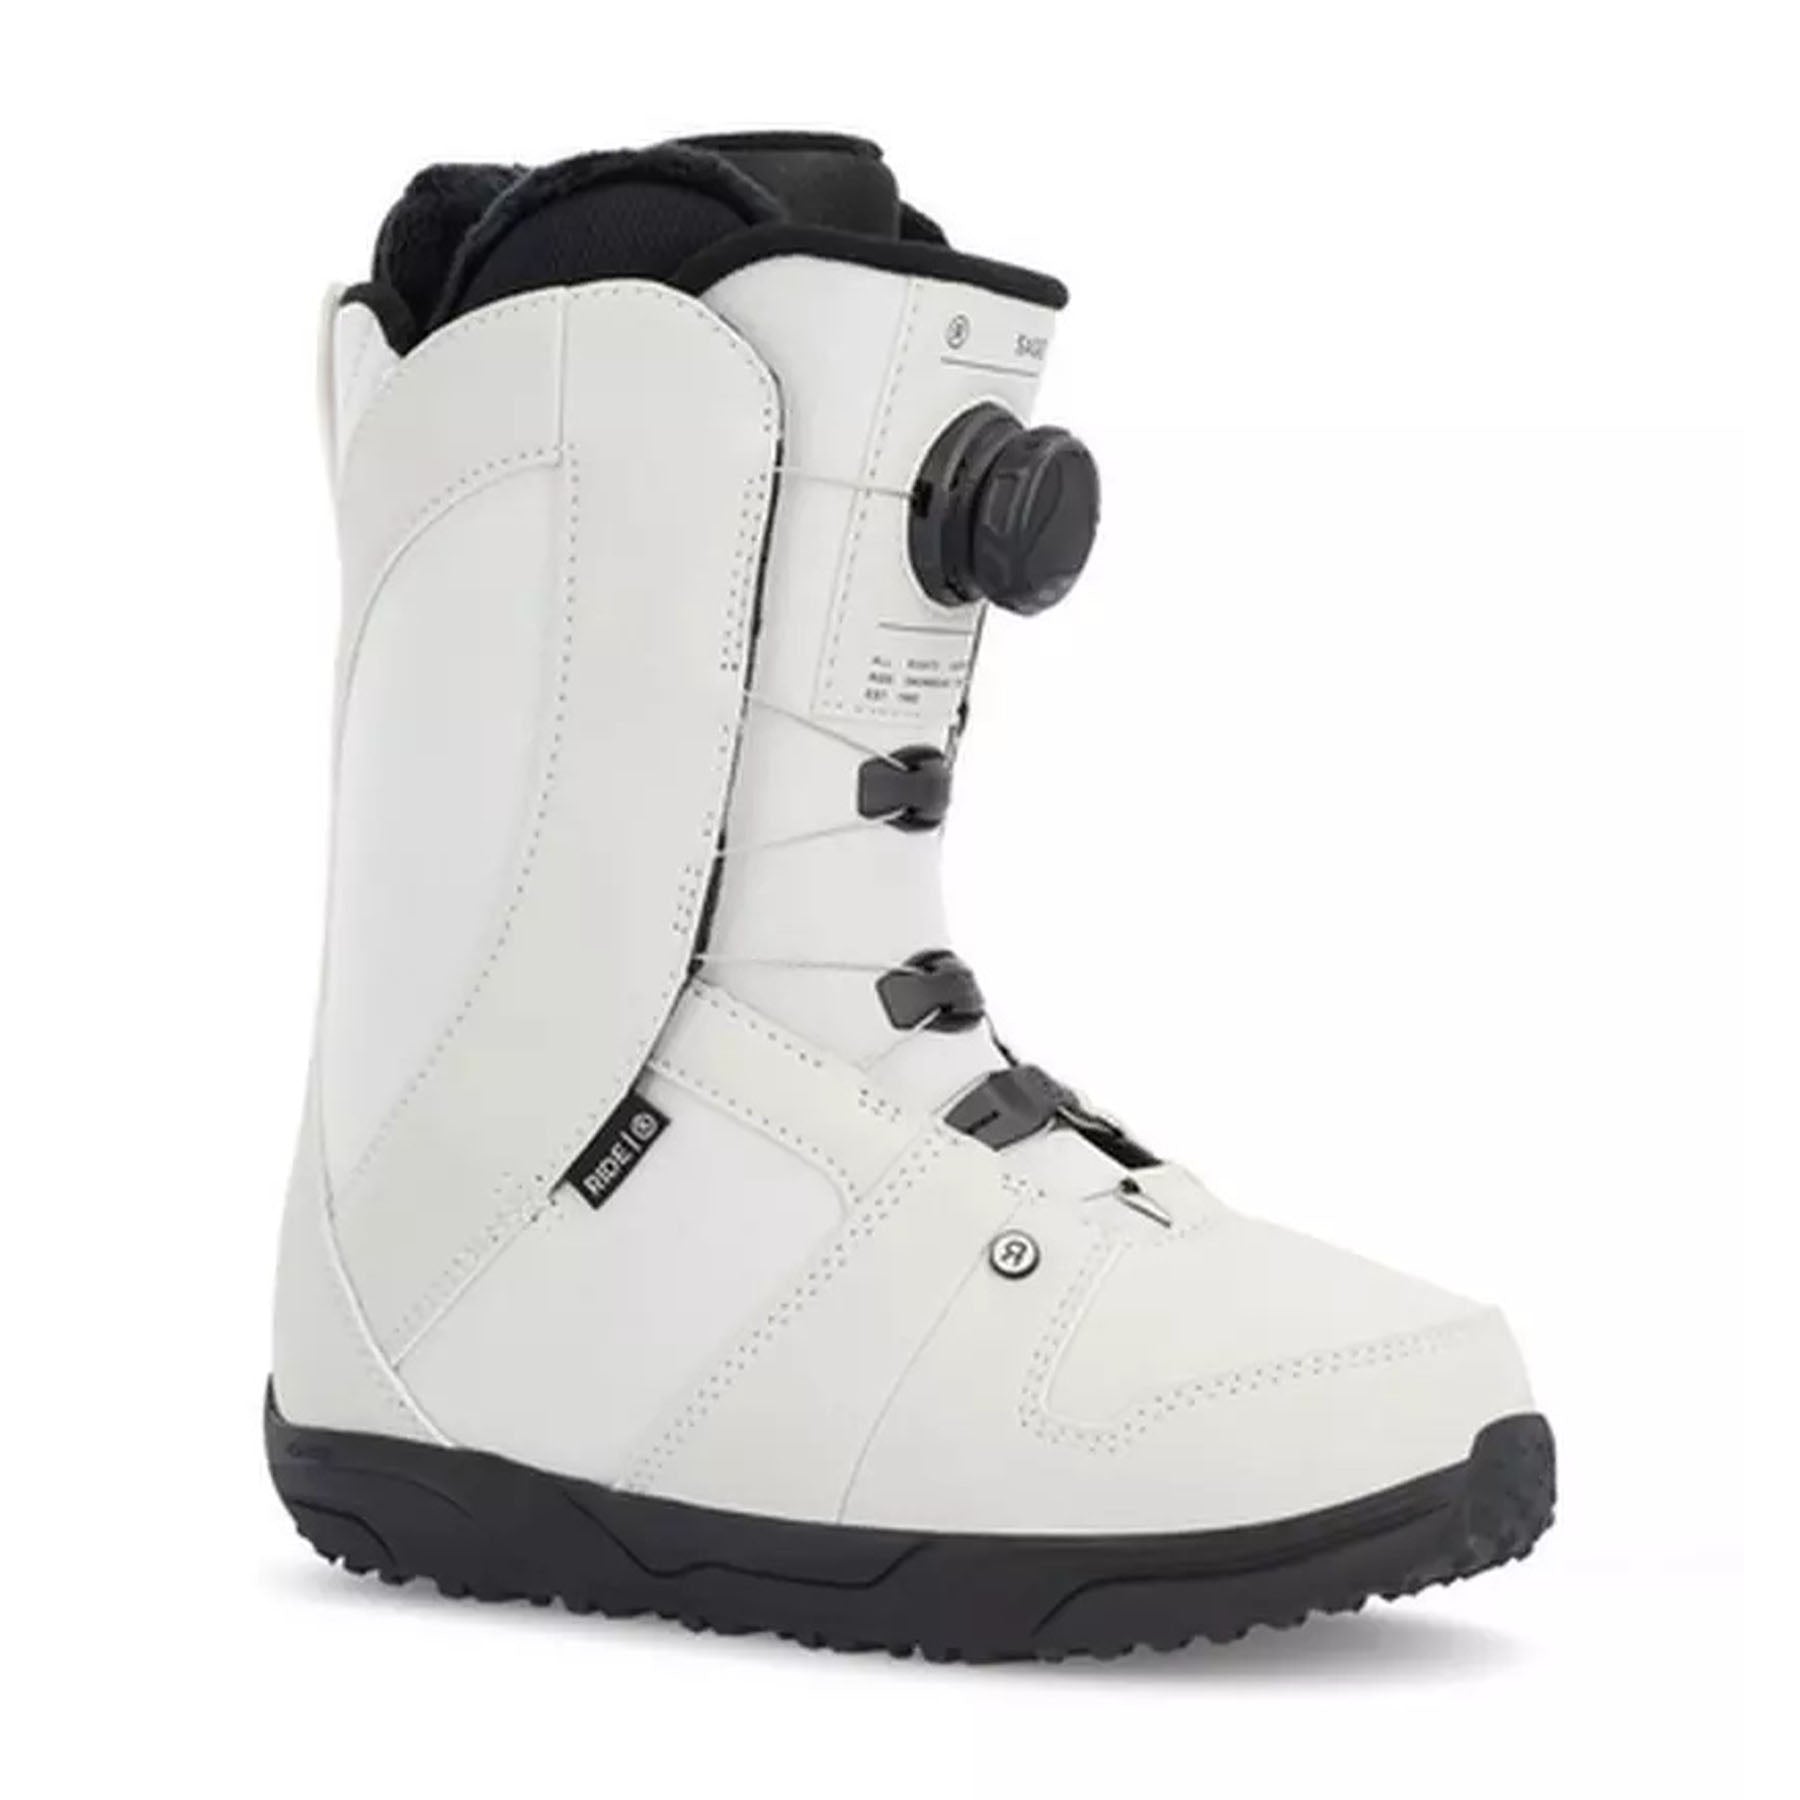 Image features the Ride Sage snowboard boot in grey with black trim and sole.